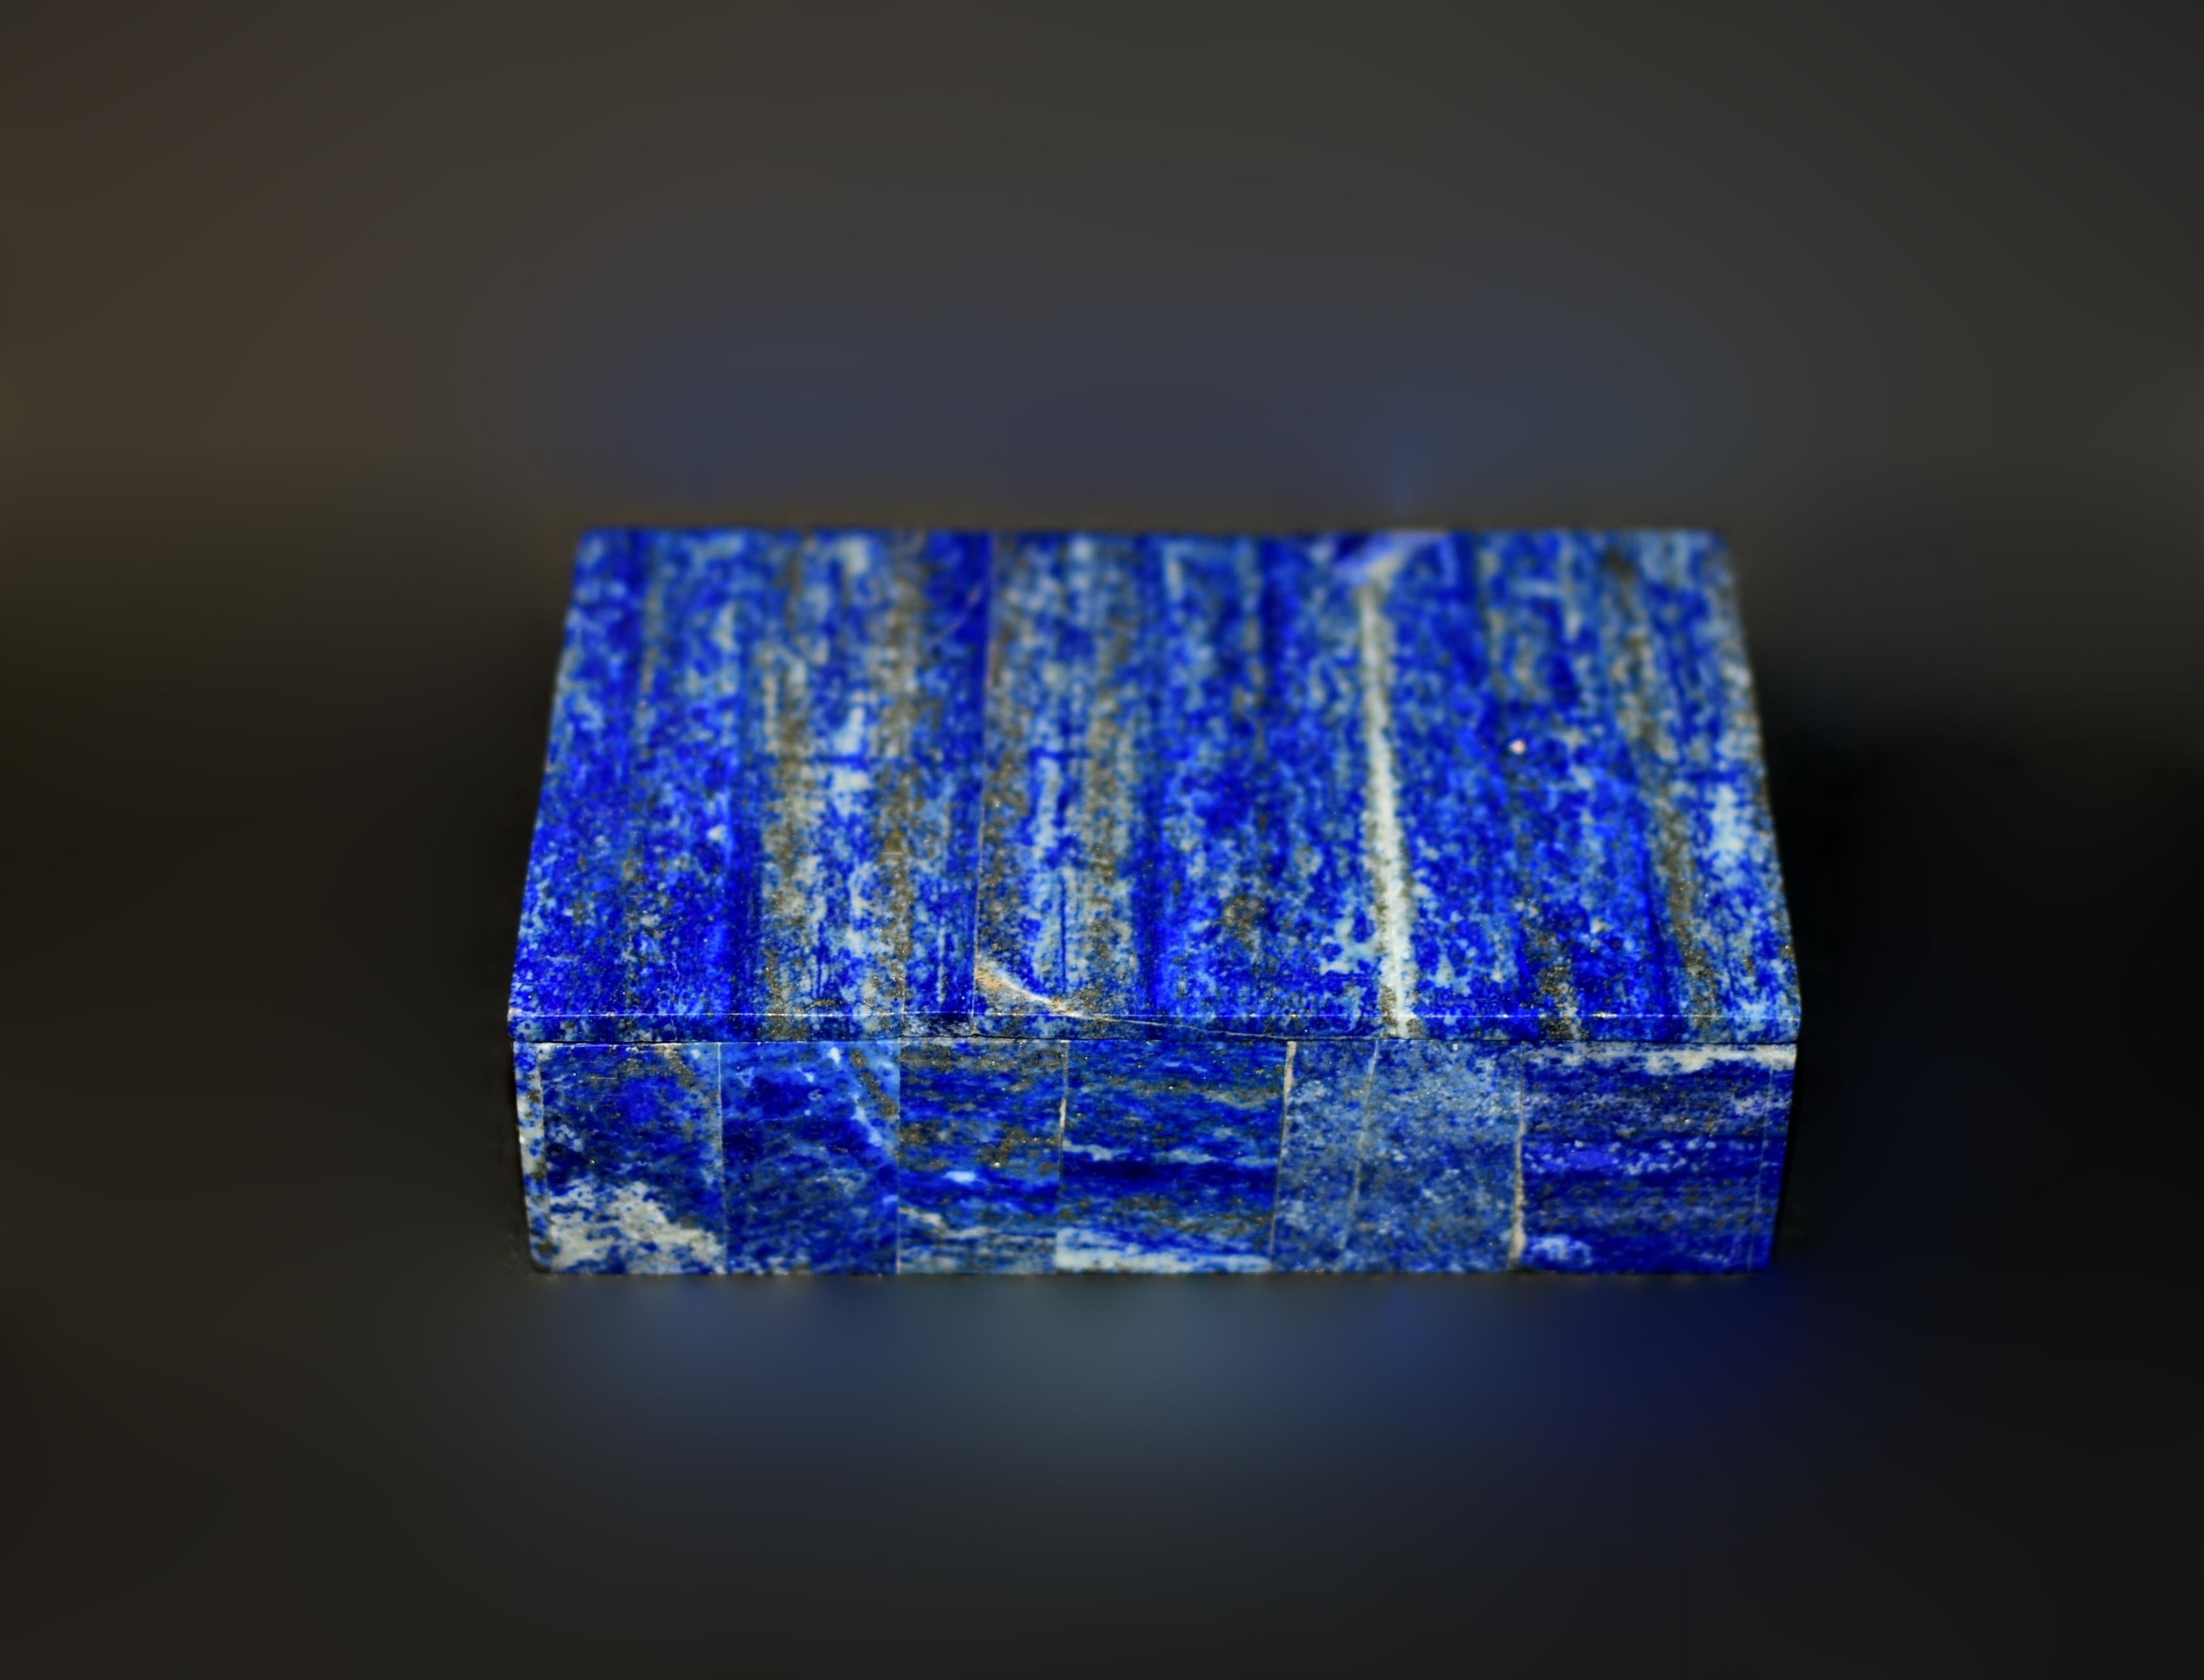 A beautiful vintage natural lapis box. Crafted from the finest grade AAA natural lapis lazuli, the box uses carefully selected pieces resembling a forest of trees against blue skies. Saturated cobalt blue with splendid gold sparkles. Interior with